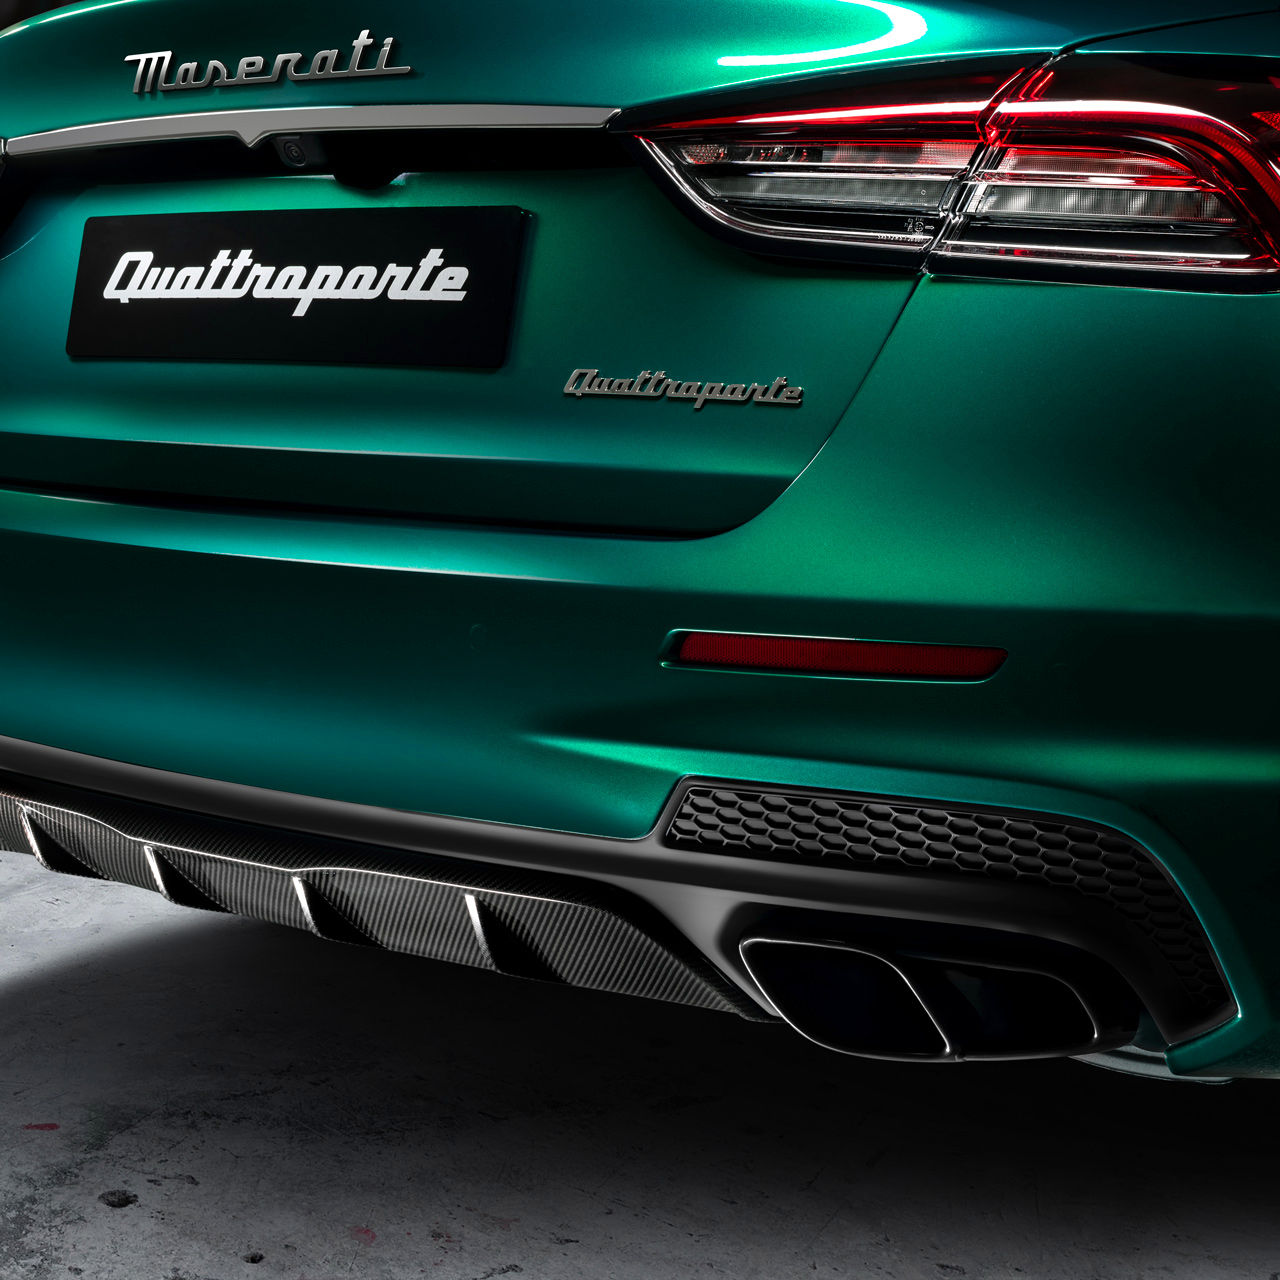 Tailgate and Exhaust of Quattroporte Trofeo